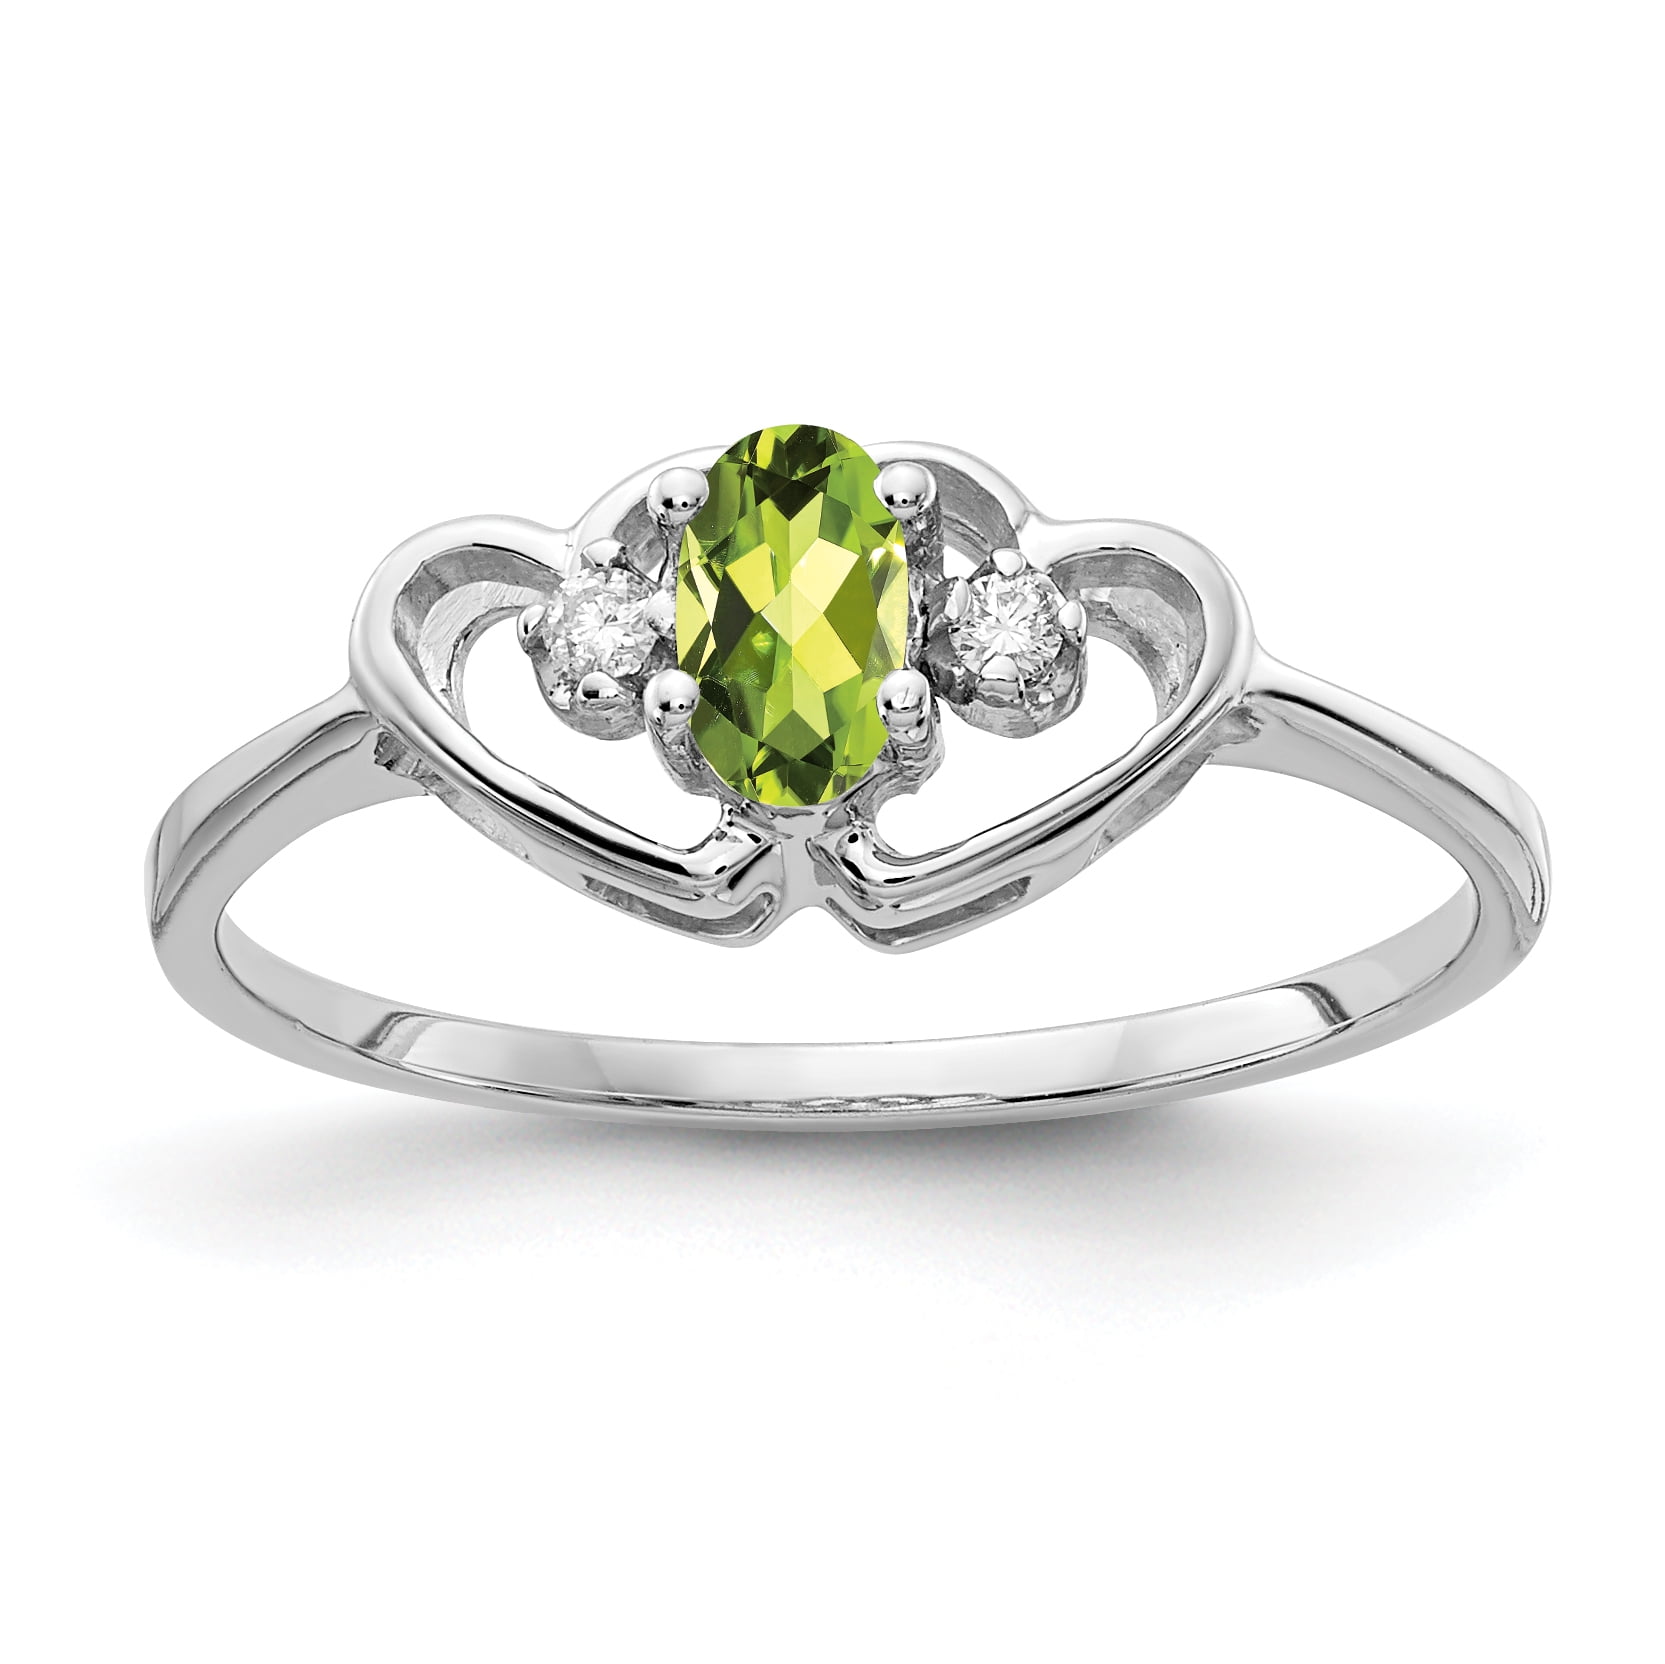 Solid 14k White Gold Heart Simulated Peridot Simulated Birthstone Ring 5mm